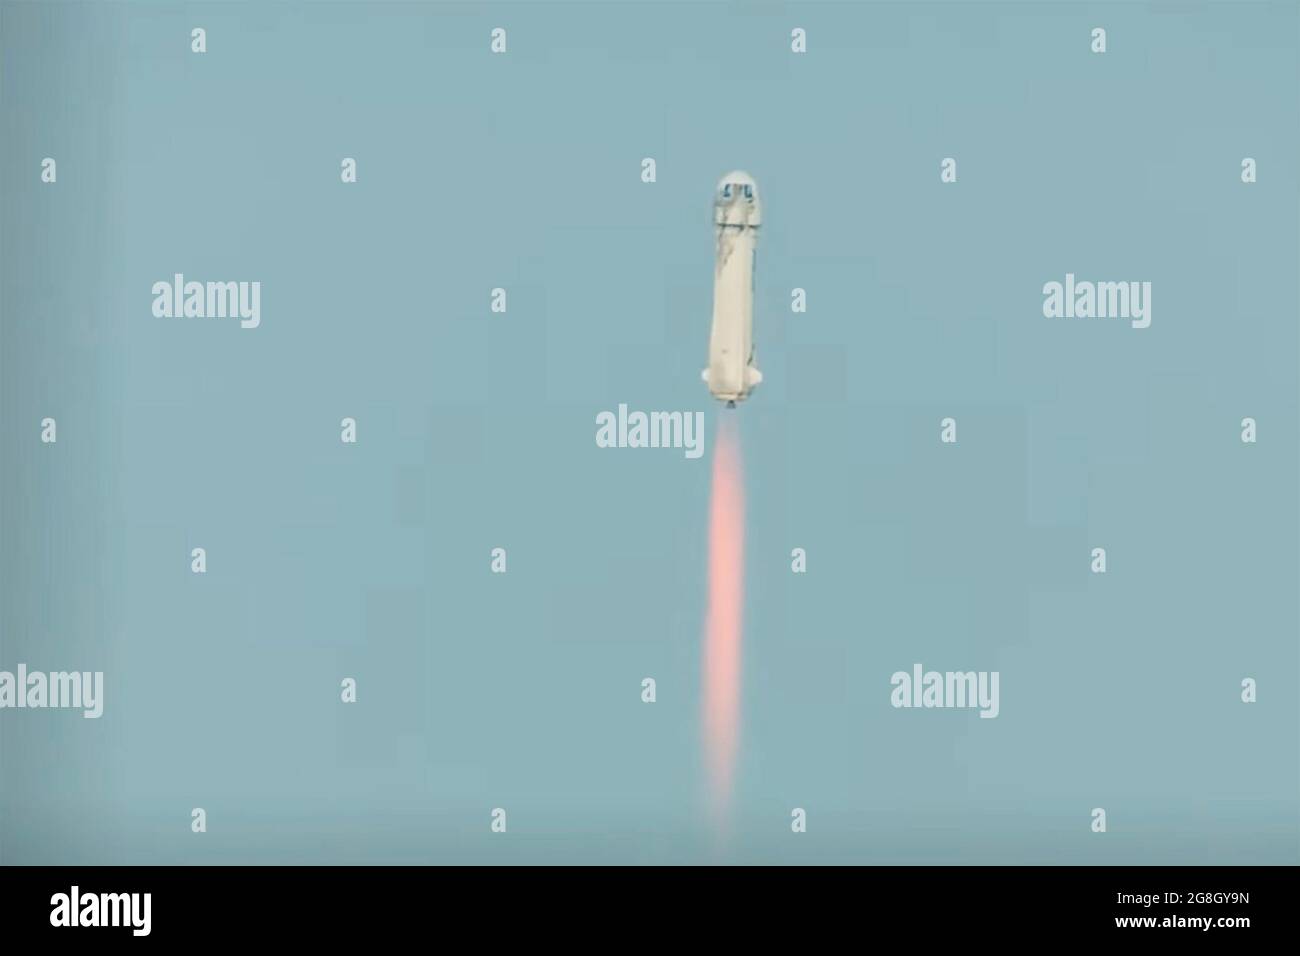 Texas, USA. 21st July, 2021. A screenshot taken from a live video released by Blue Origin on July 20, 2021 shows Blue Origin's spacecraft New Shepard rocket lifting off from its test site in Texas, the United States. U.S. aerospace company Blue Origin completed its first test spaceflight with founder Jeff Bezos onboard, marking a giant leap forward for the company's commercial suborbital spaceflight tourism ambitions. (Blue Origin/Handout via Xinhua) Credit: Xinhua/Alamy Live News Stock Photo